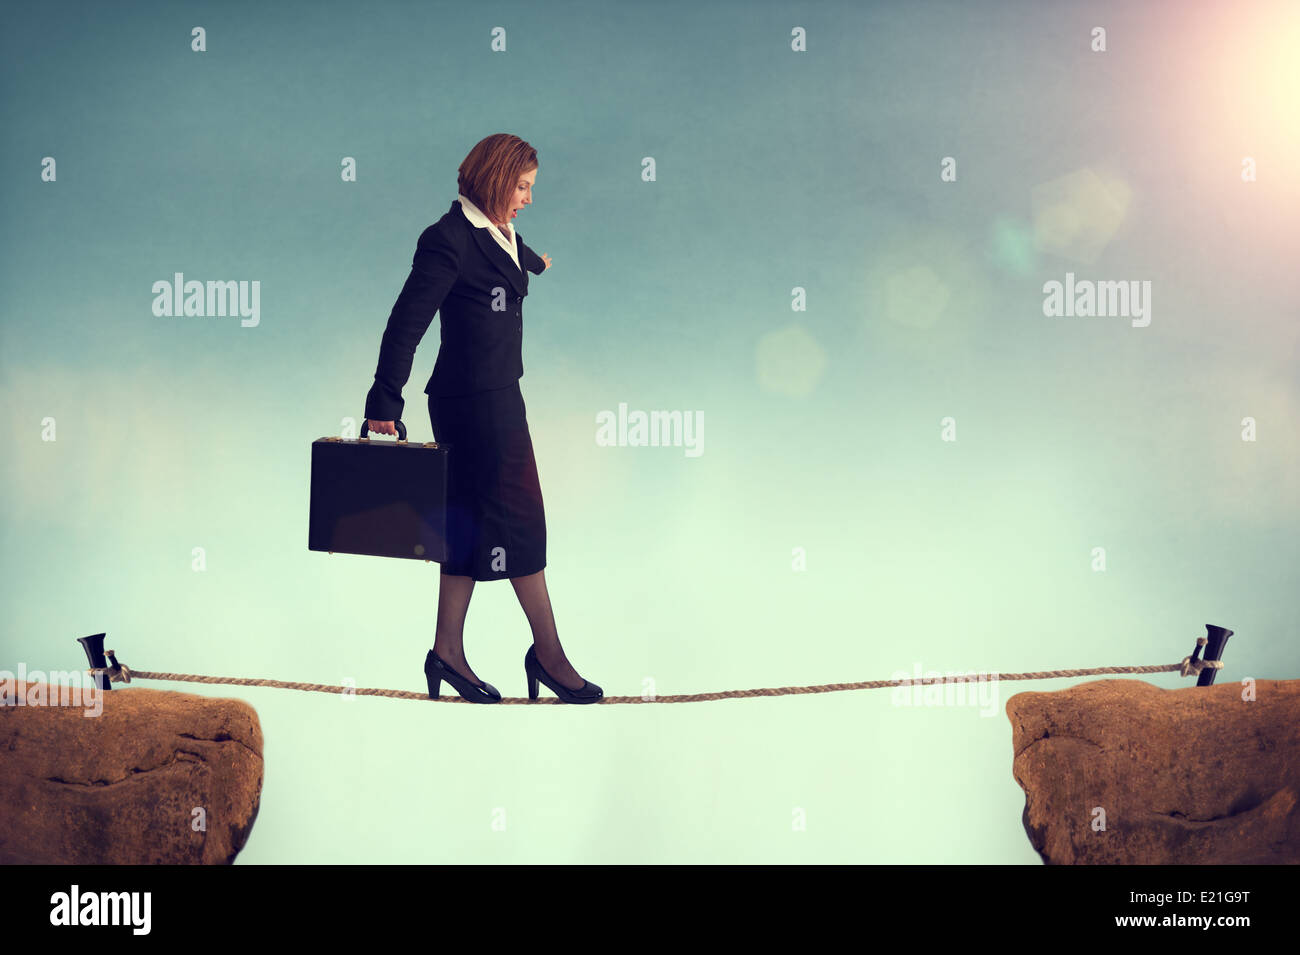 businesswoman balancing on a tightrope facing a challenge or risk or conquering adversity concept Stock Photo